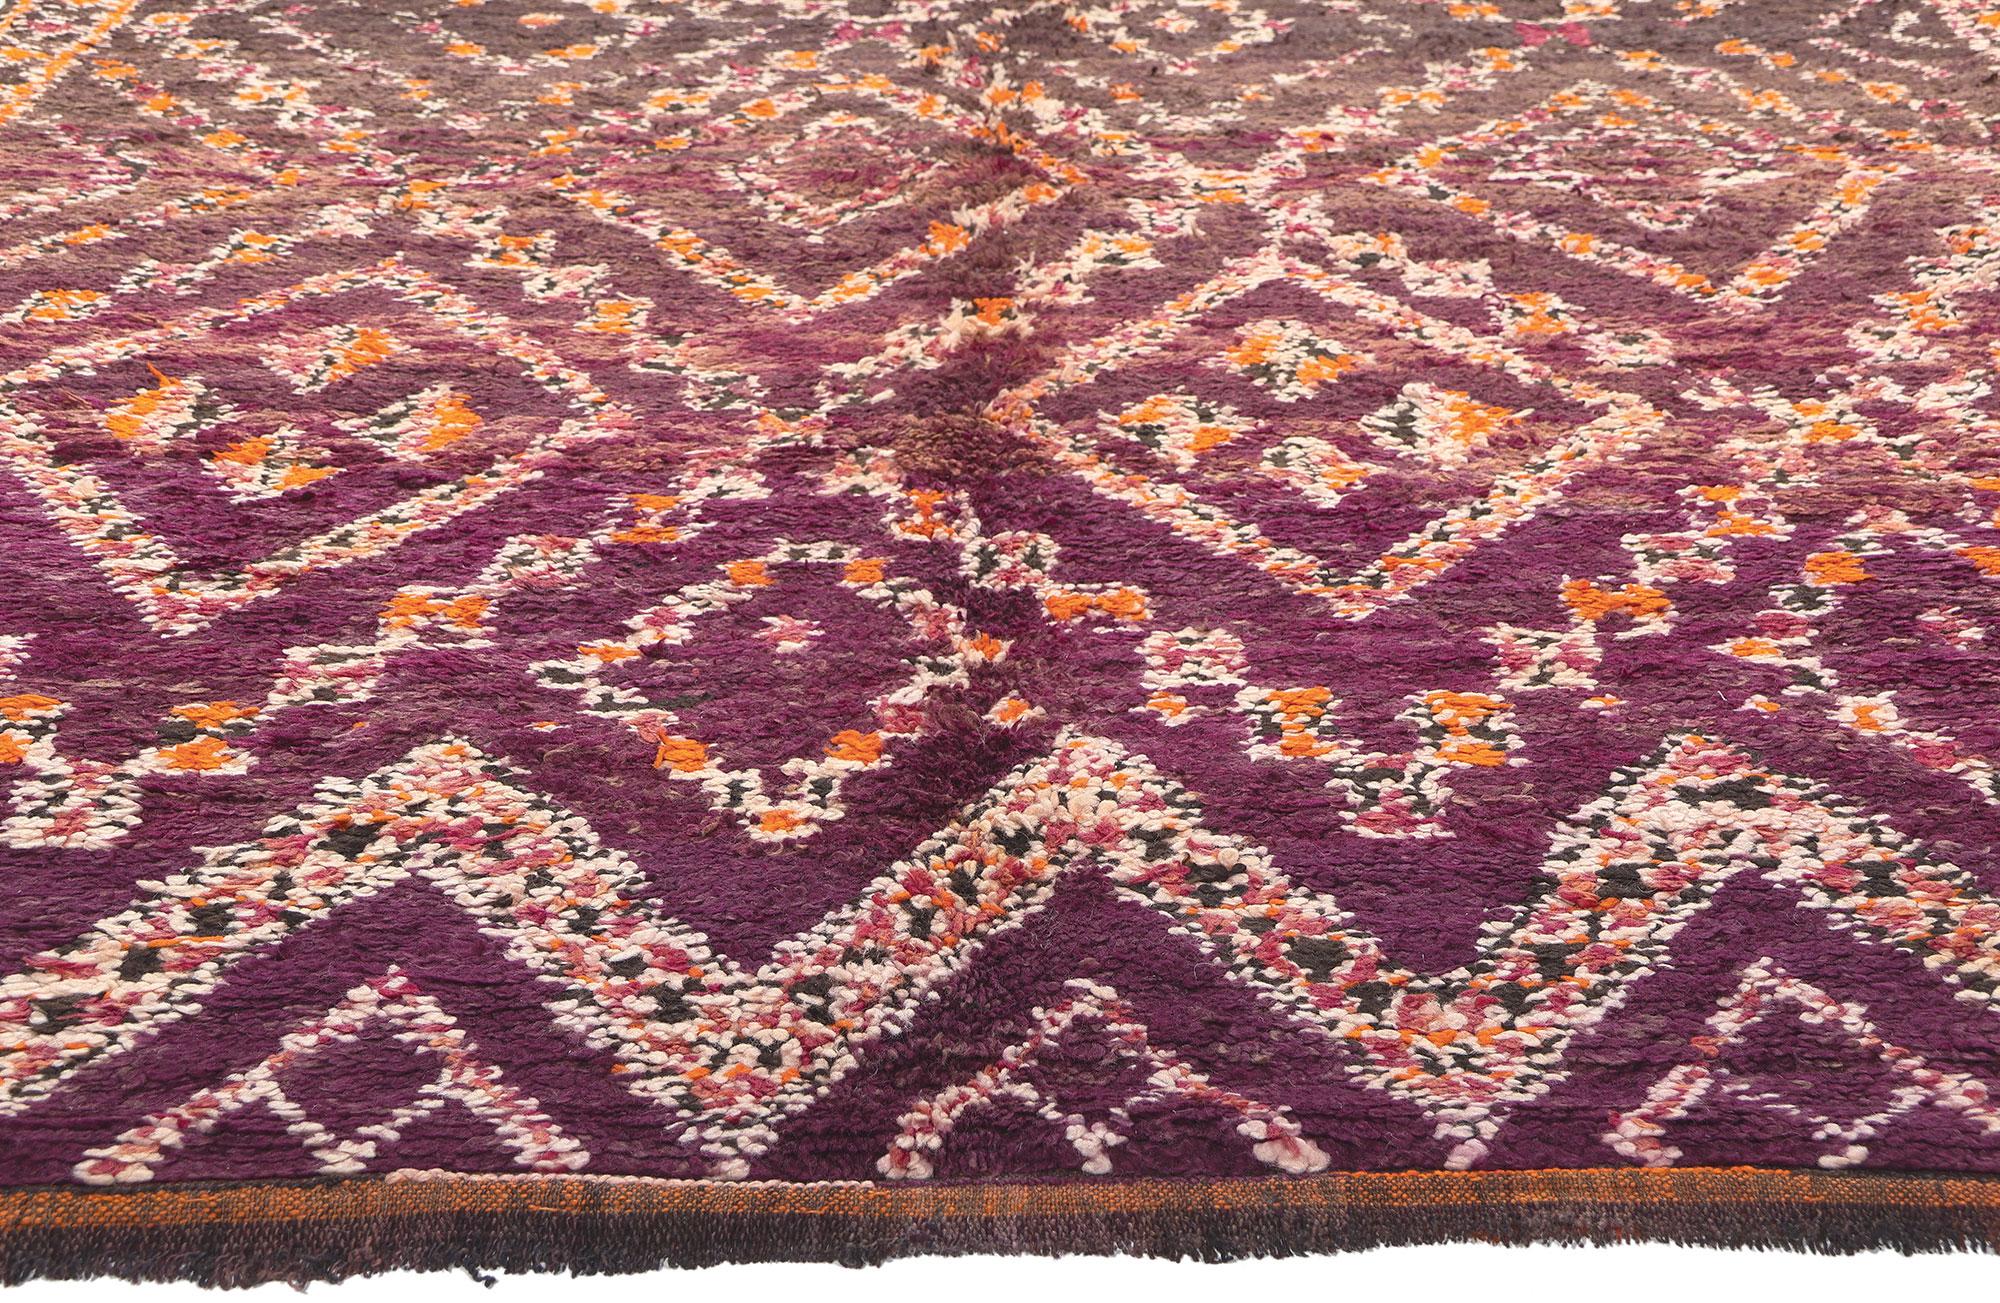 Vintage Beni MGuild Moroccan Rug, Tribal Enchantment Meets Bohemian Rhapsody In Good Condition For Sale In Dallas, TX